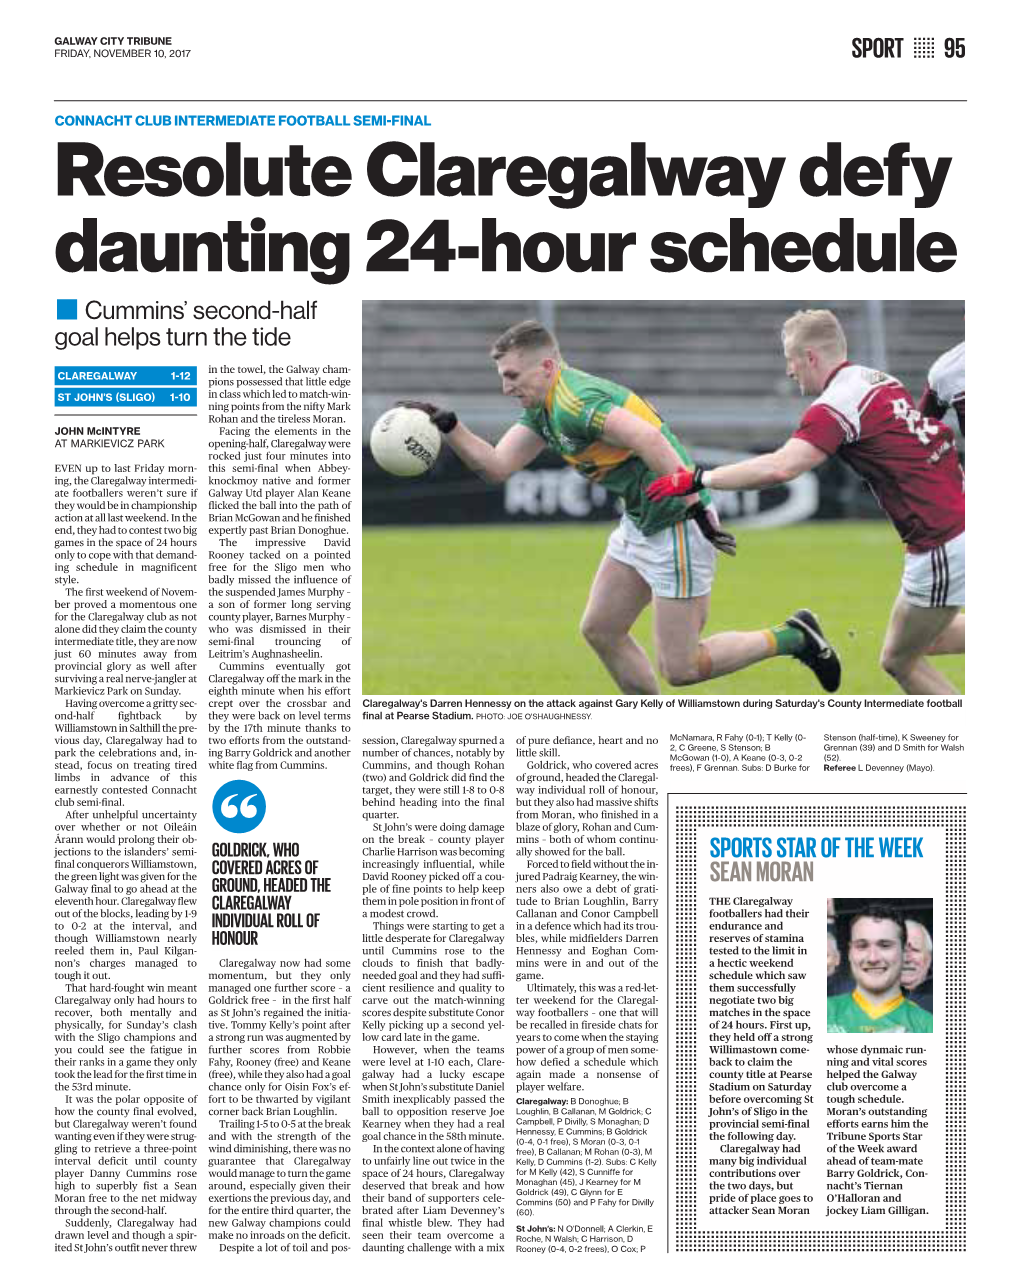 Resolute Claregalway Defy Daunting 24-Hour Schedule ■ Cummins’ Second-Half Goal Helps Turn the Tide